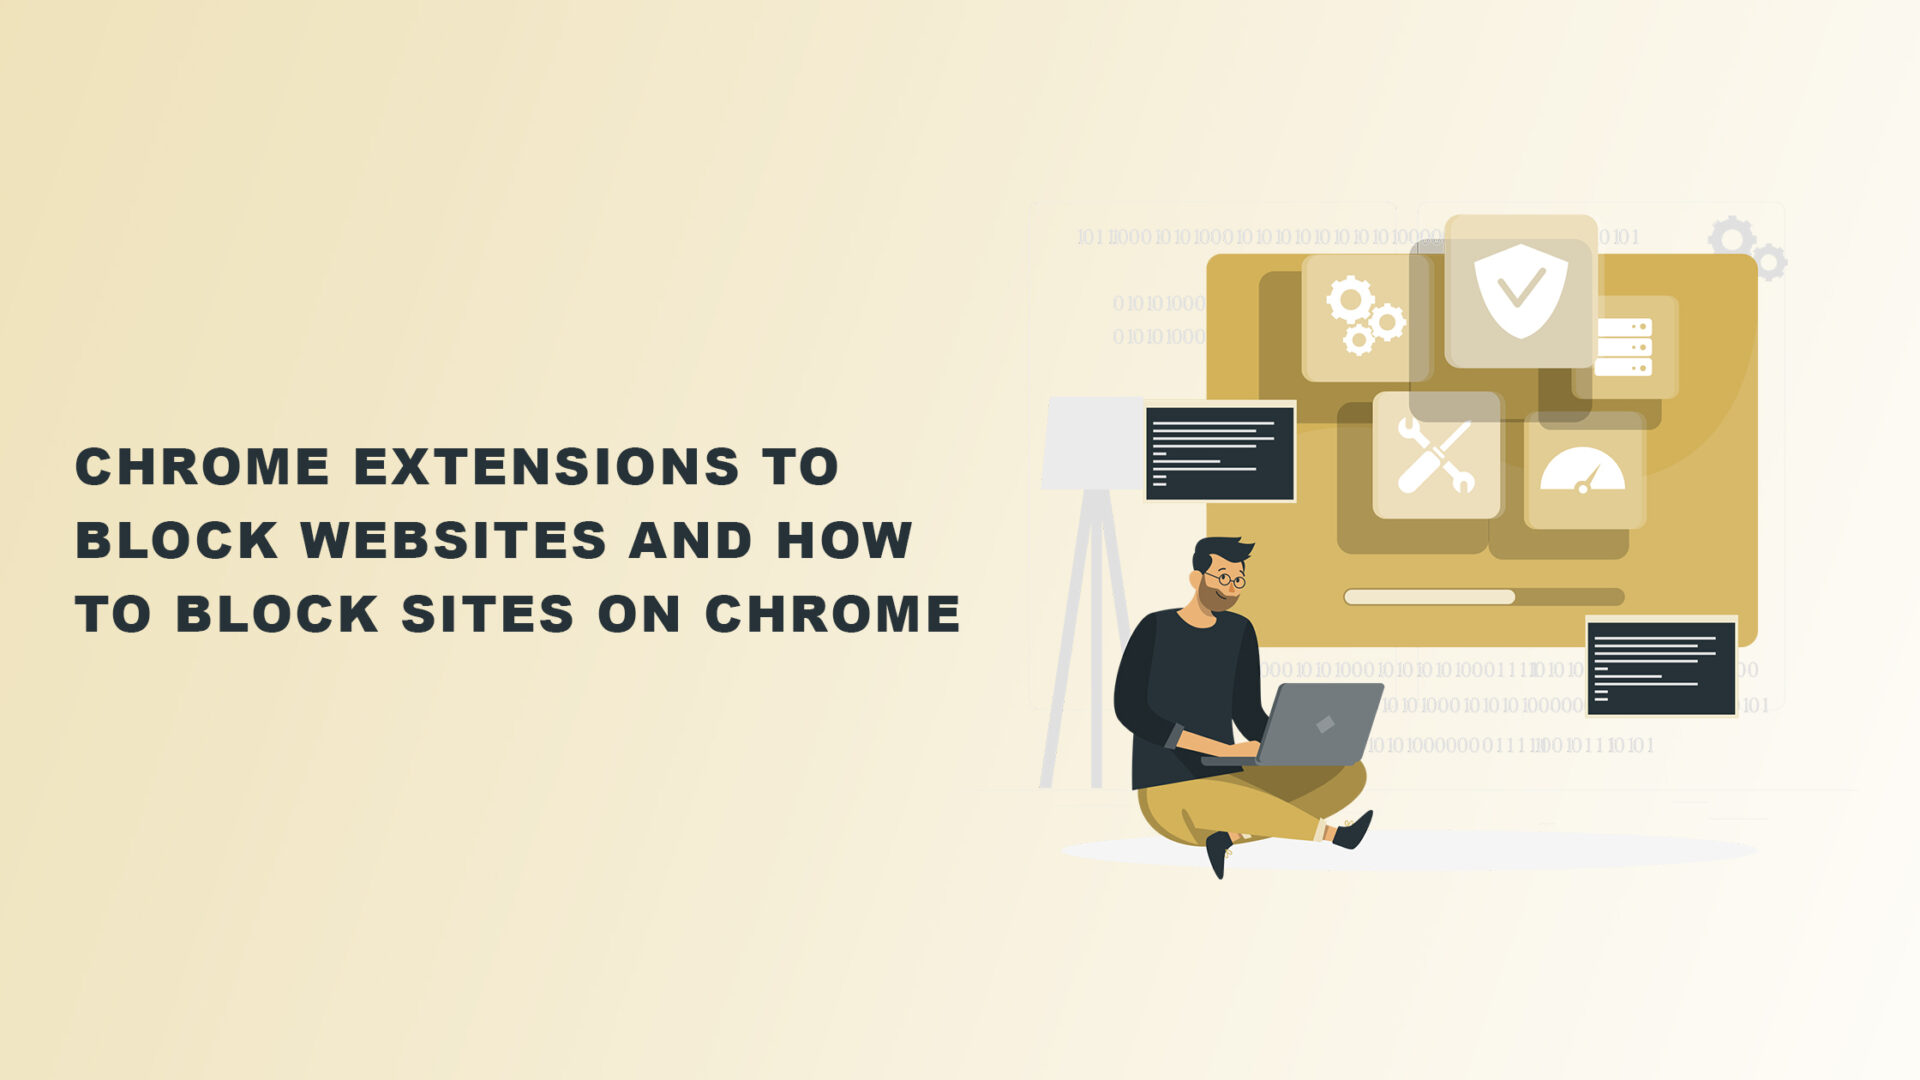 Chrome extensions to block websites and how to block sites on Chrome